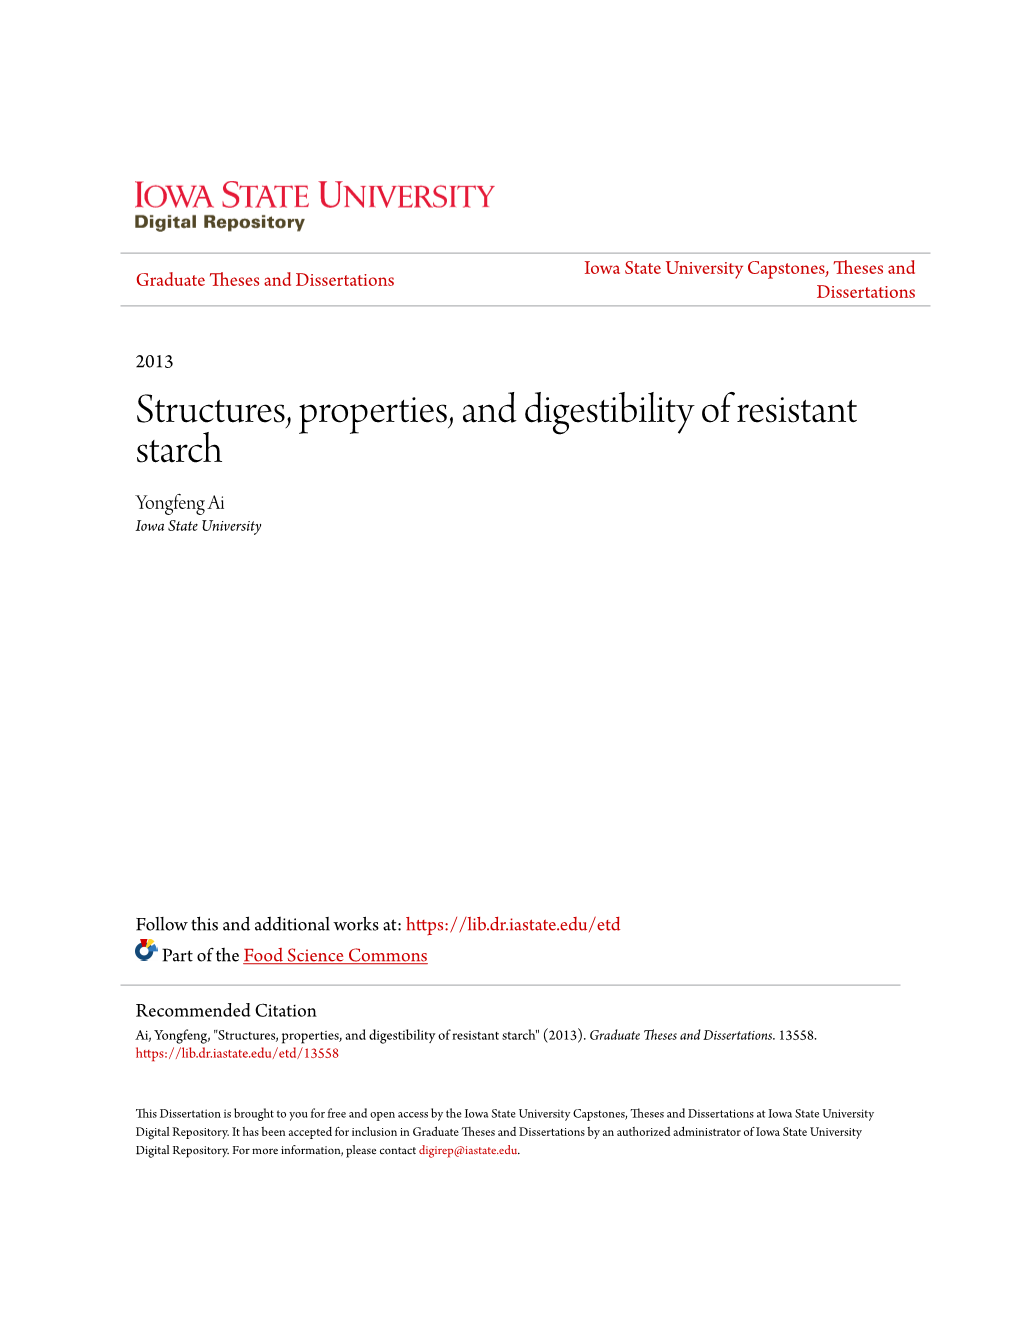 Structures, Properties, and Digestibility of Resistant Starch Yongfeng Ai Iowa State University